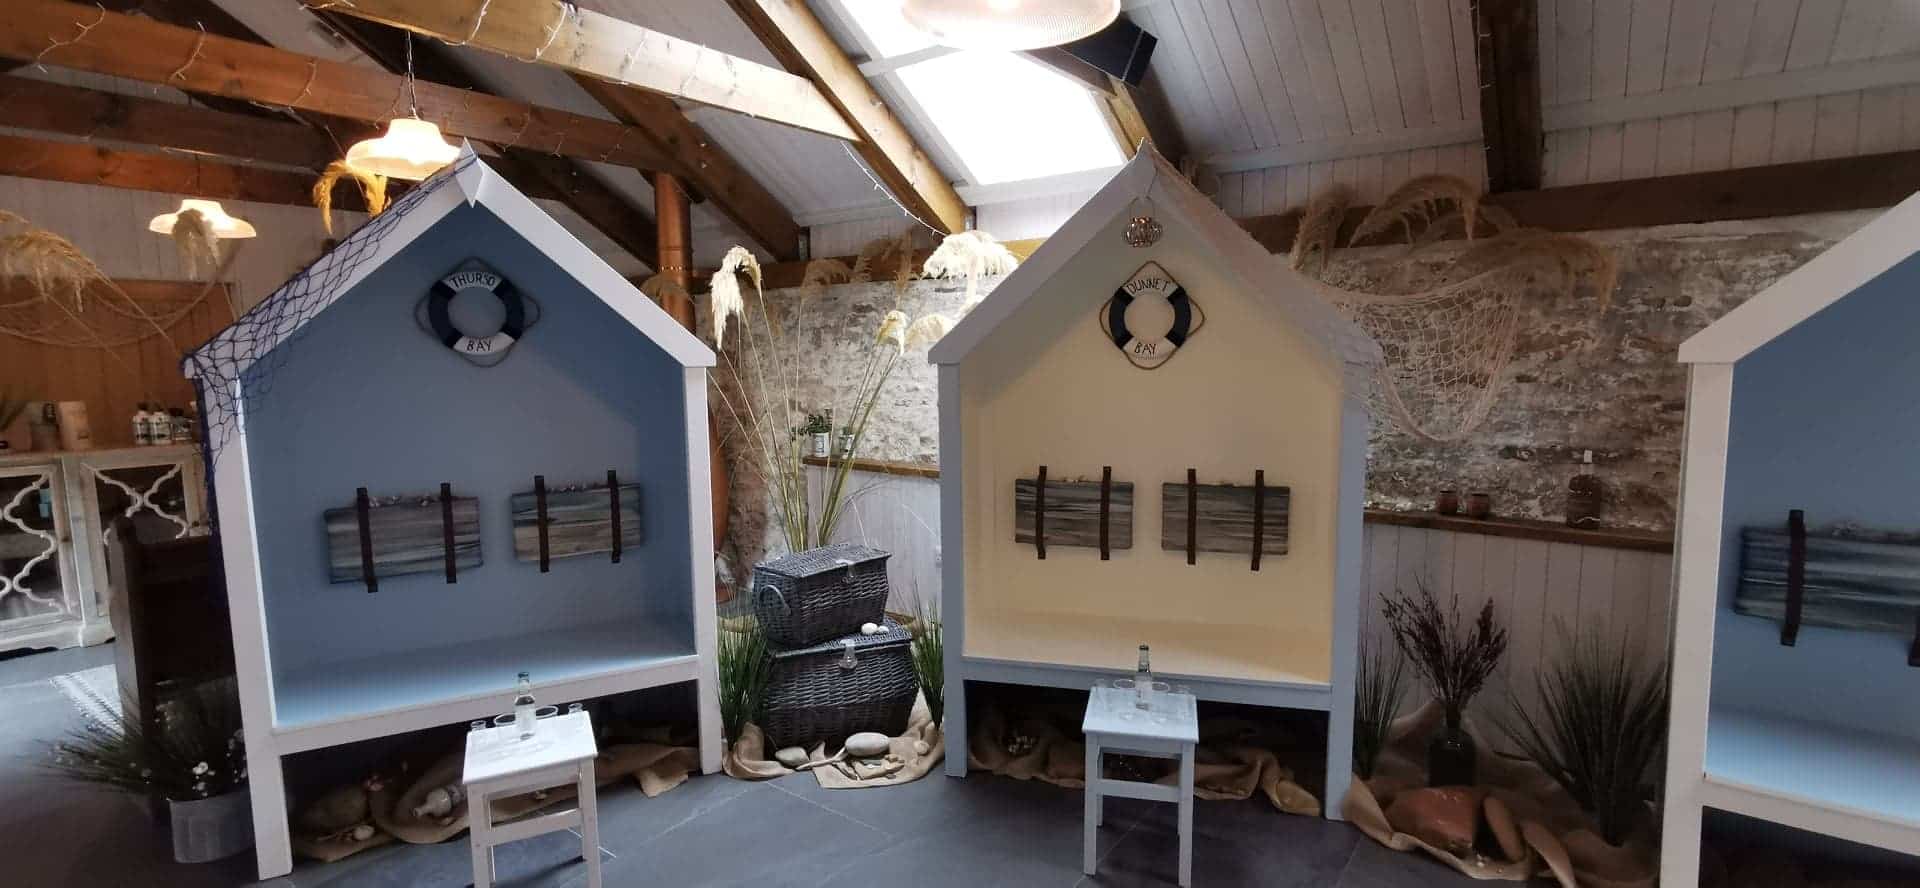 Three wooden indoor boat sheds in the tasting room